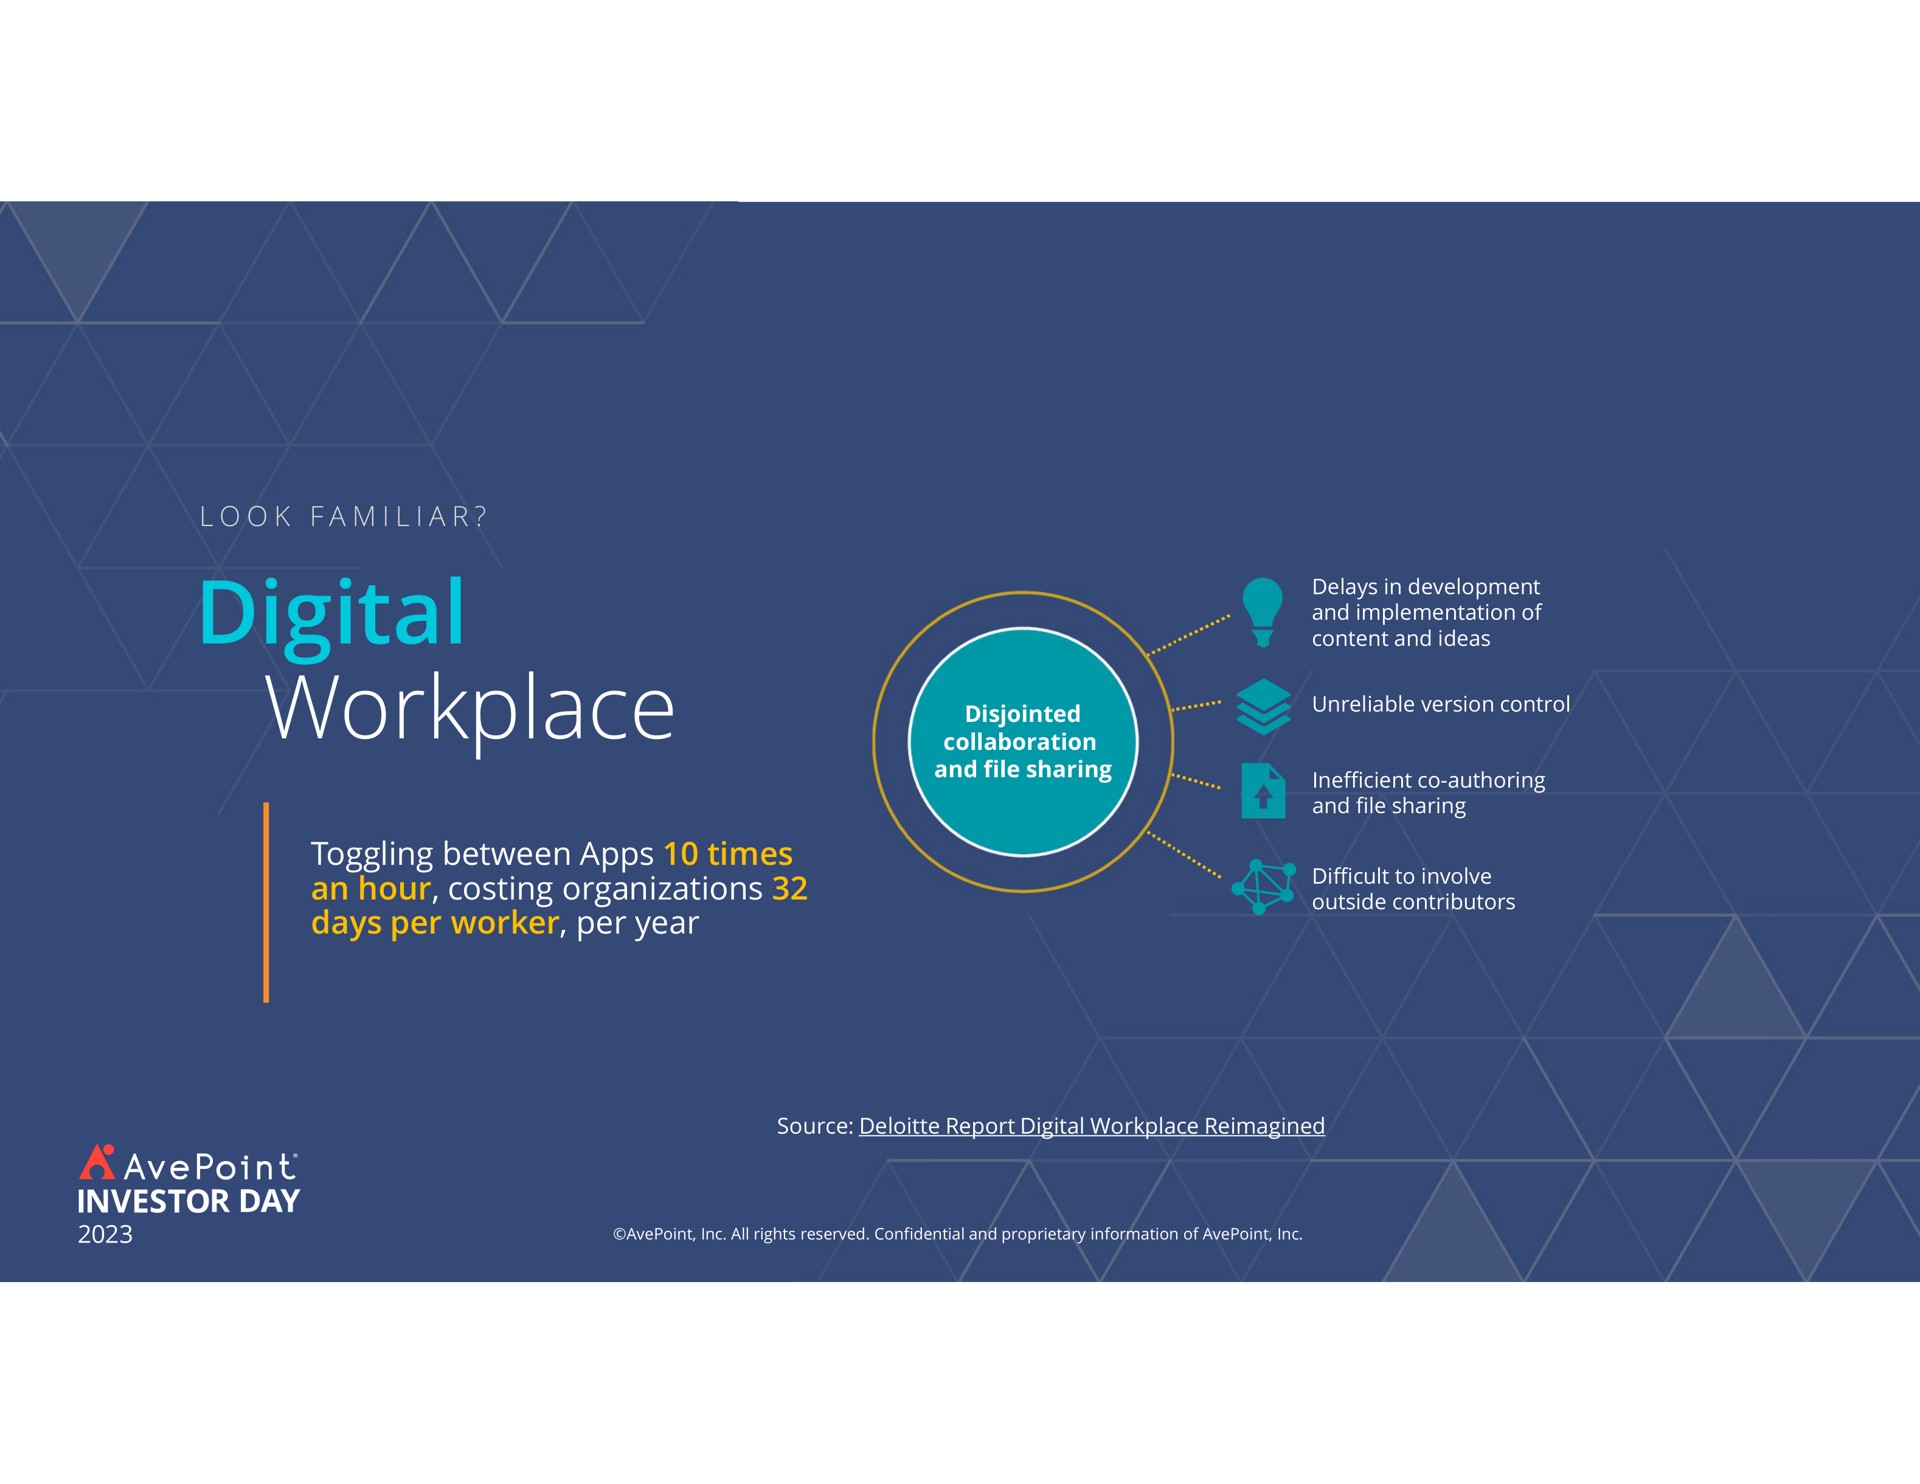 digital workplace toggling between times an hour costing organizations days per worker per year voted | AvePoint